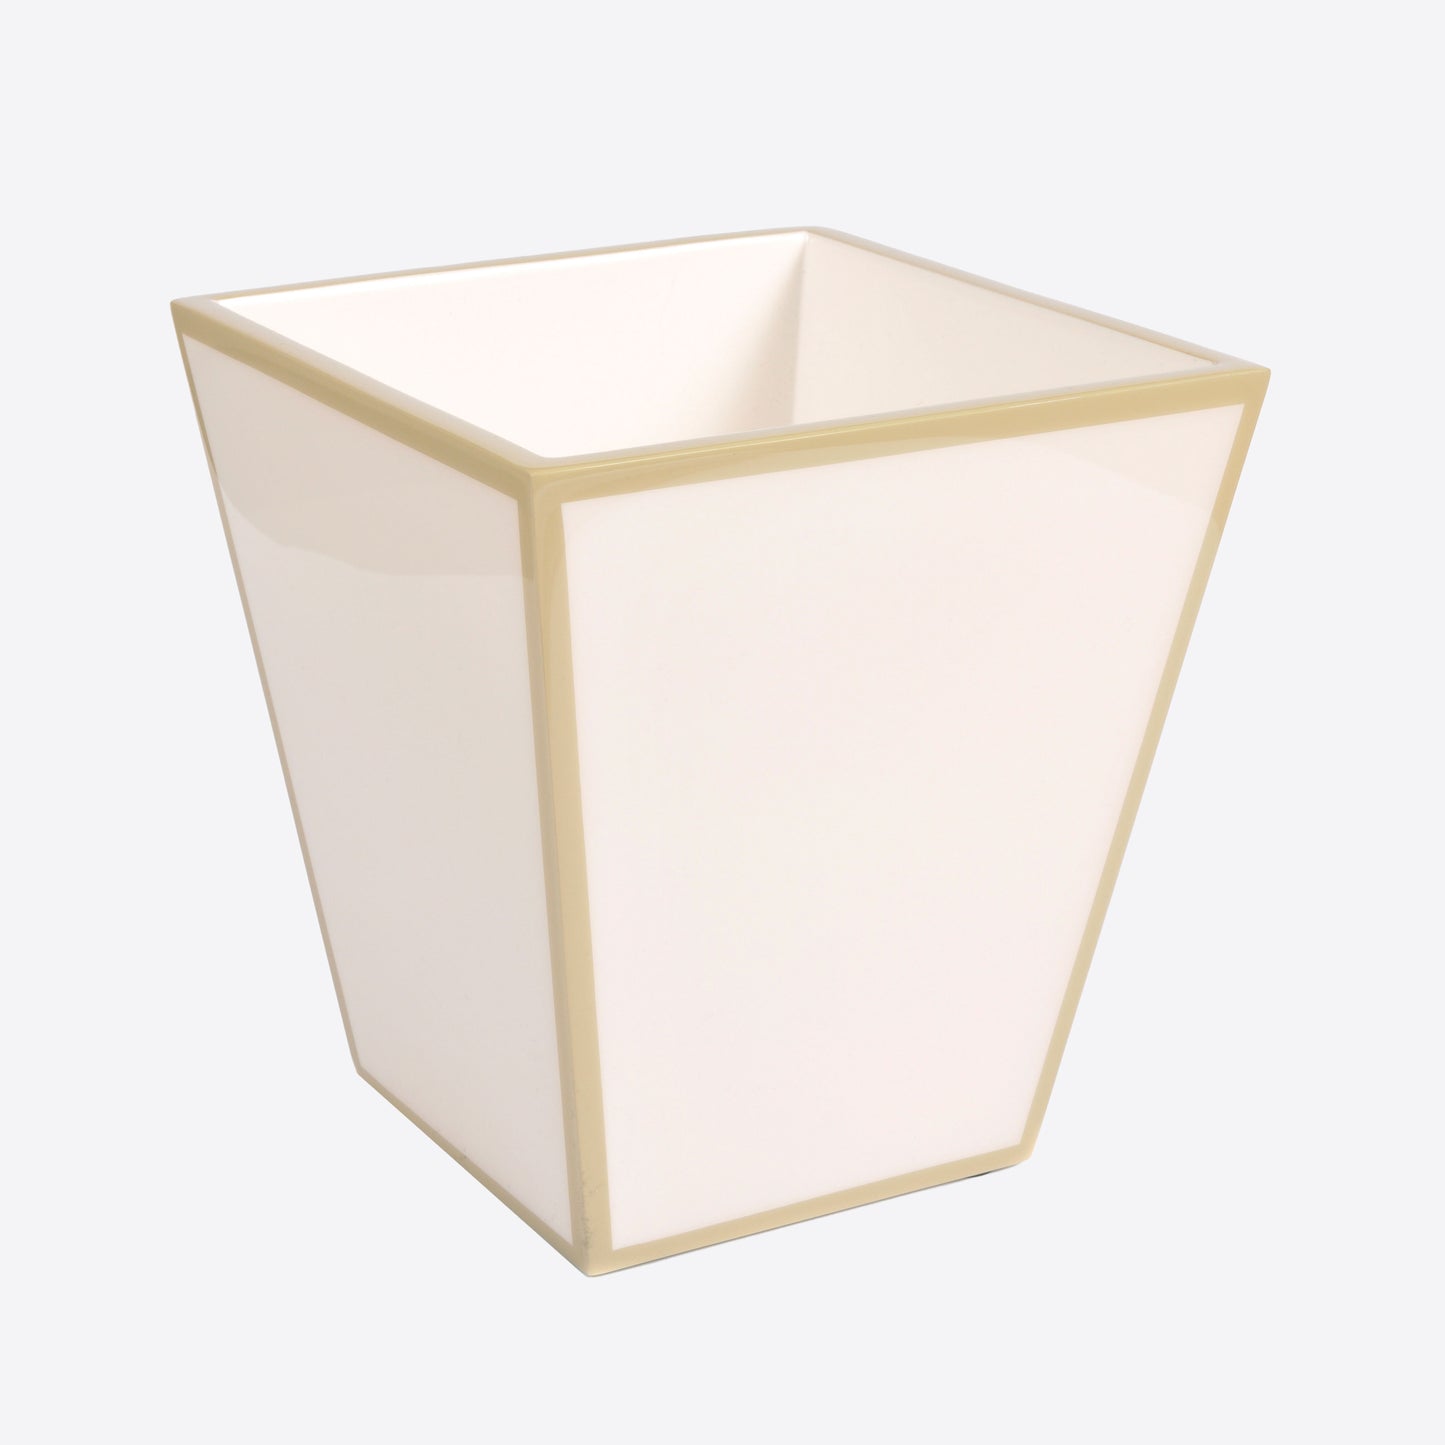 Lacquer Waste Bin White and Taupe Joanna Wood Shop